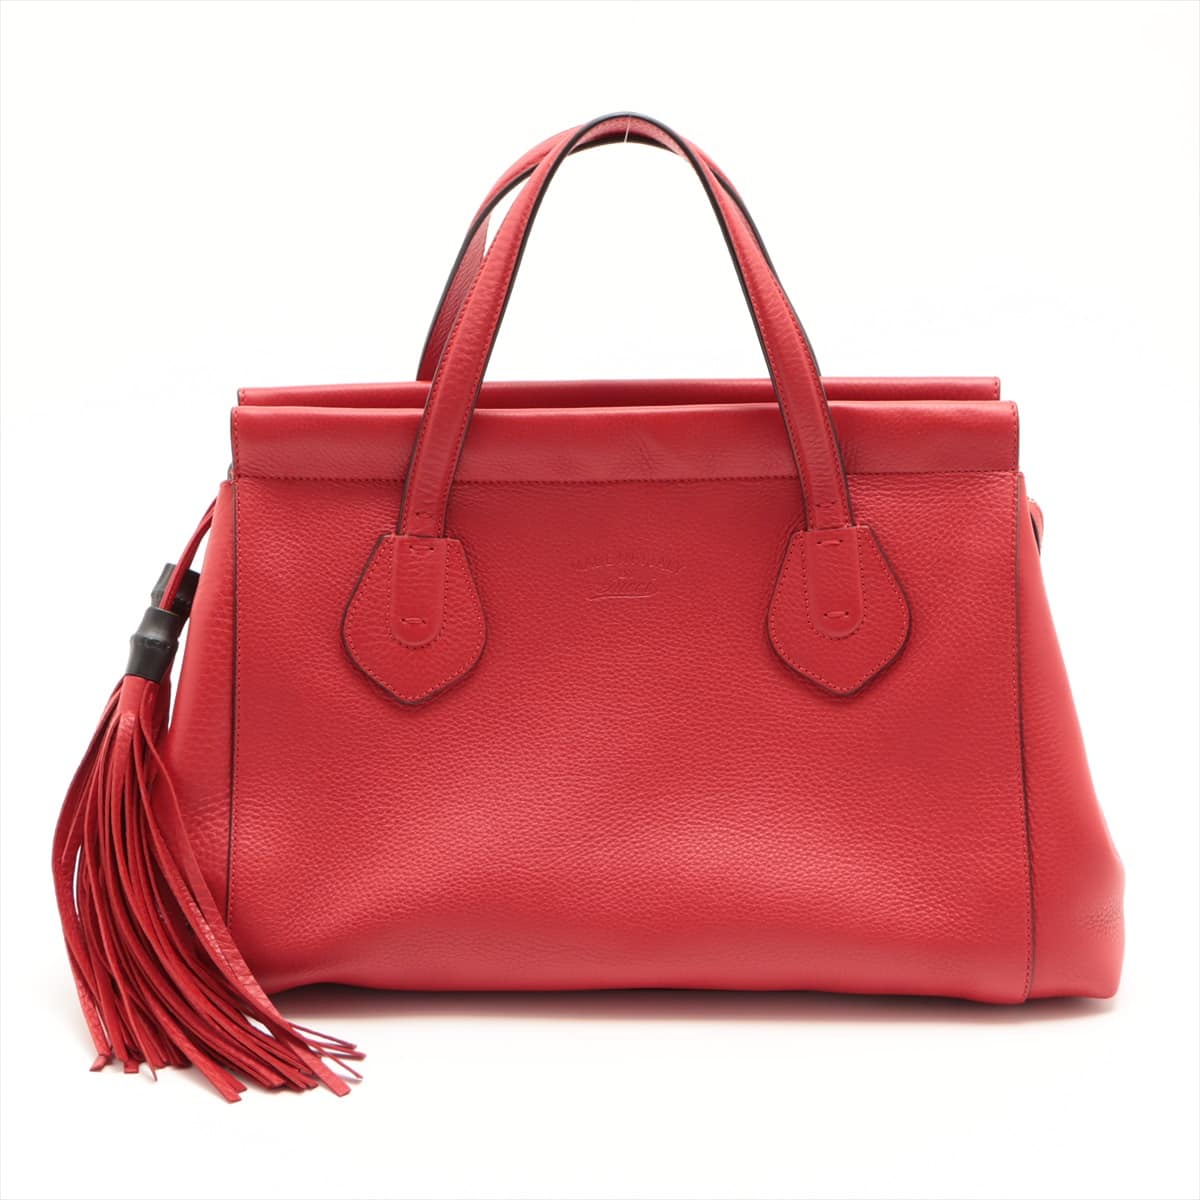 Gucci Bamboo Tassel Leather Hand bag Red 354469